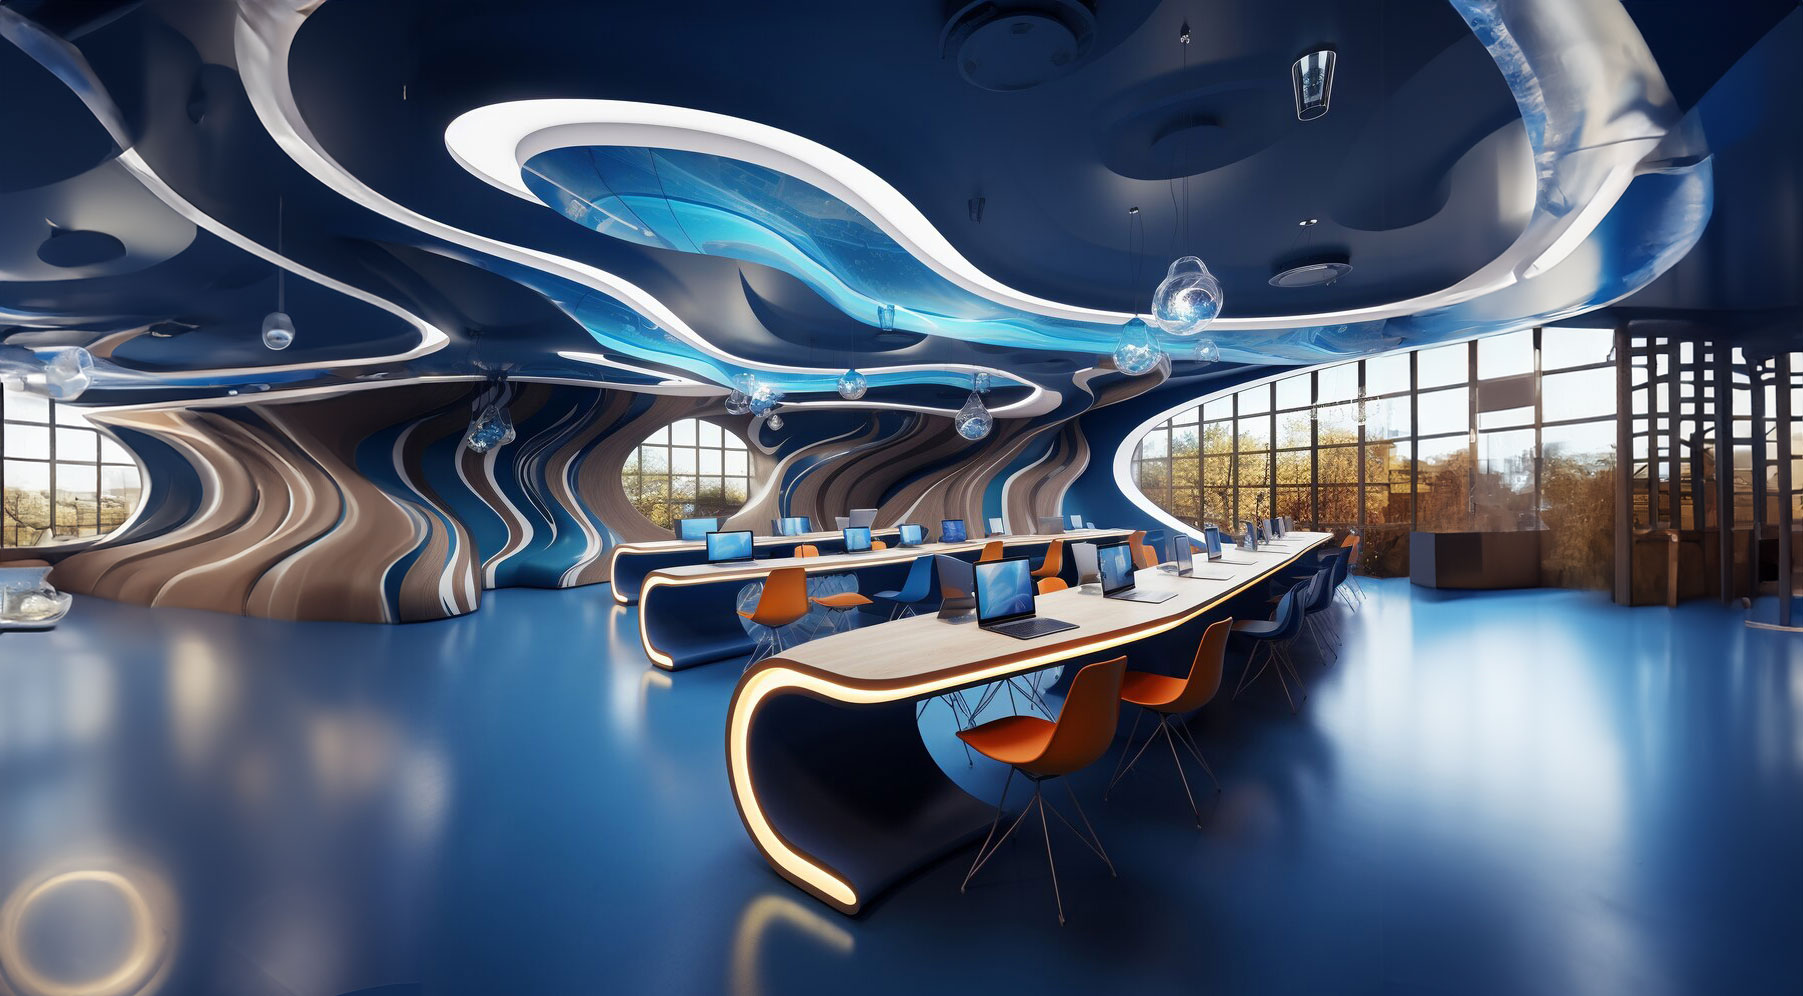 Futuristic view of school classroom with state-of-the-art architecture